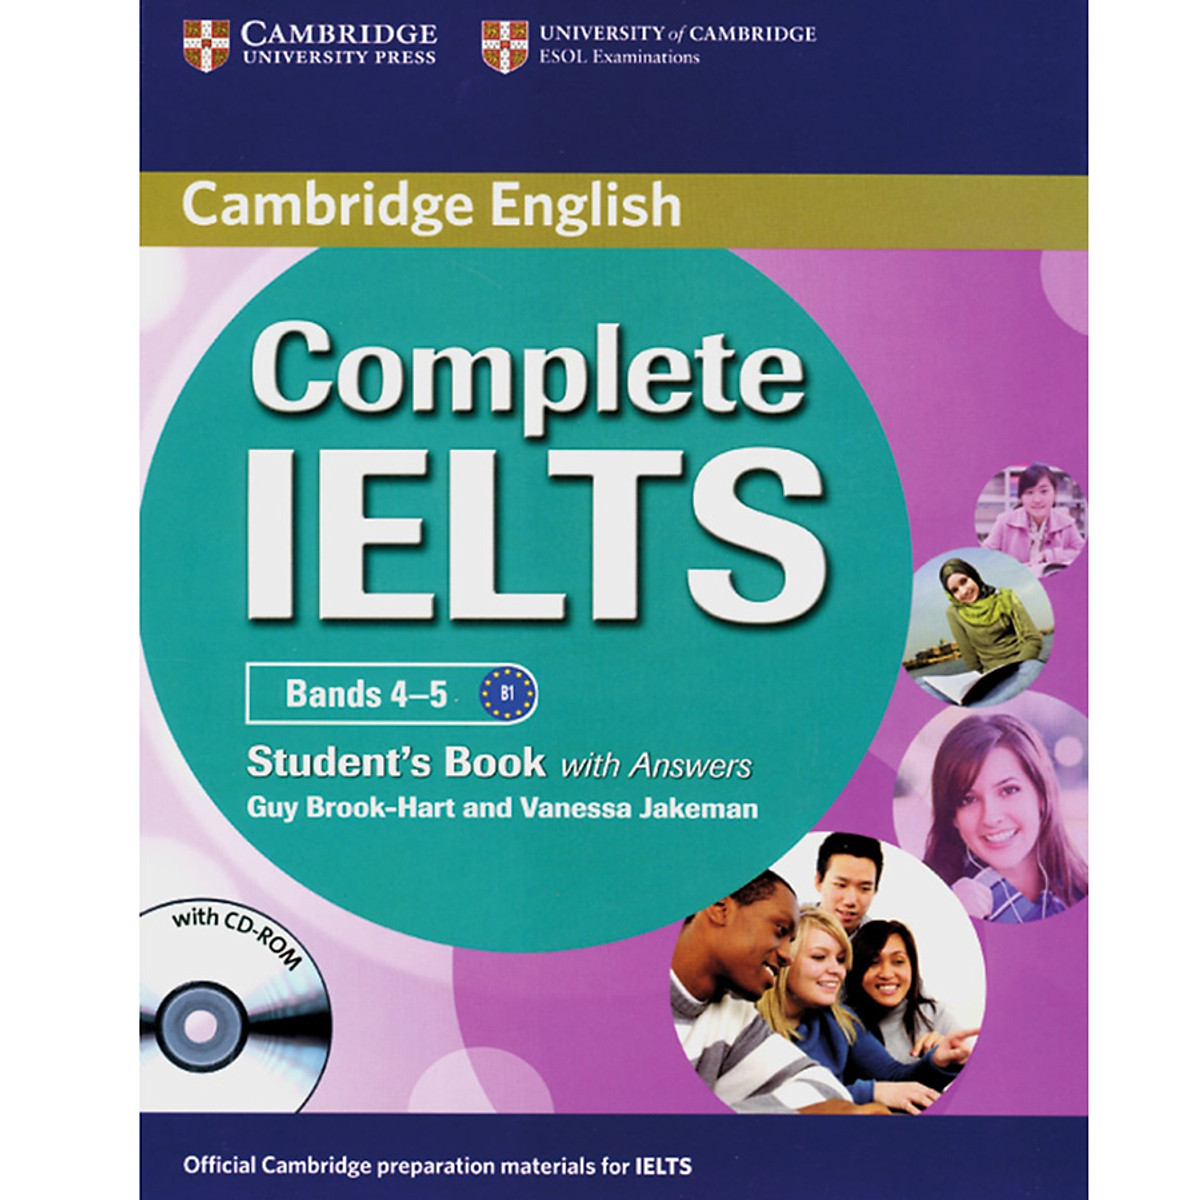 Complete IELTS B1 Student's Book with answer with CD-ROM